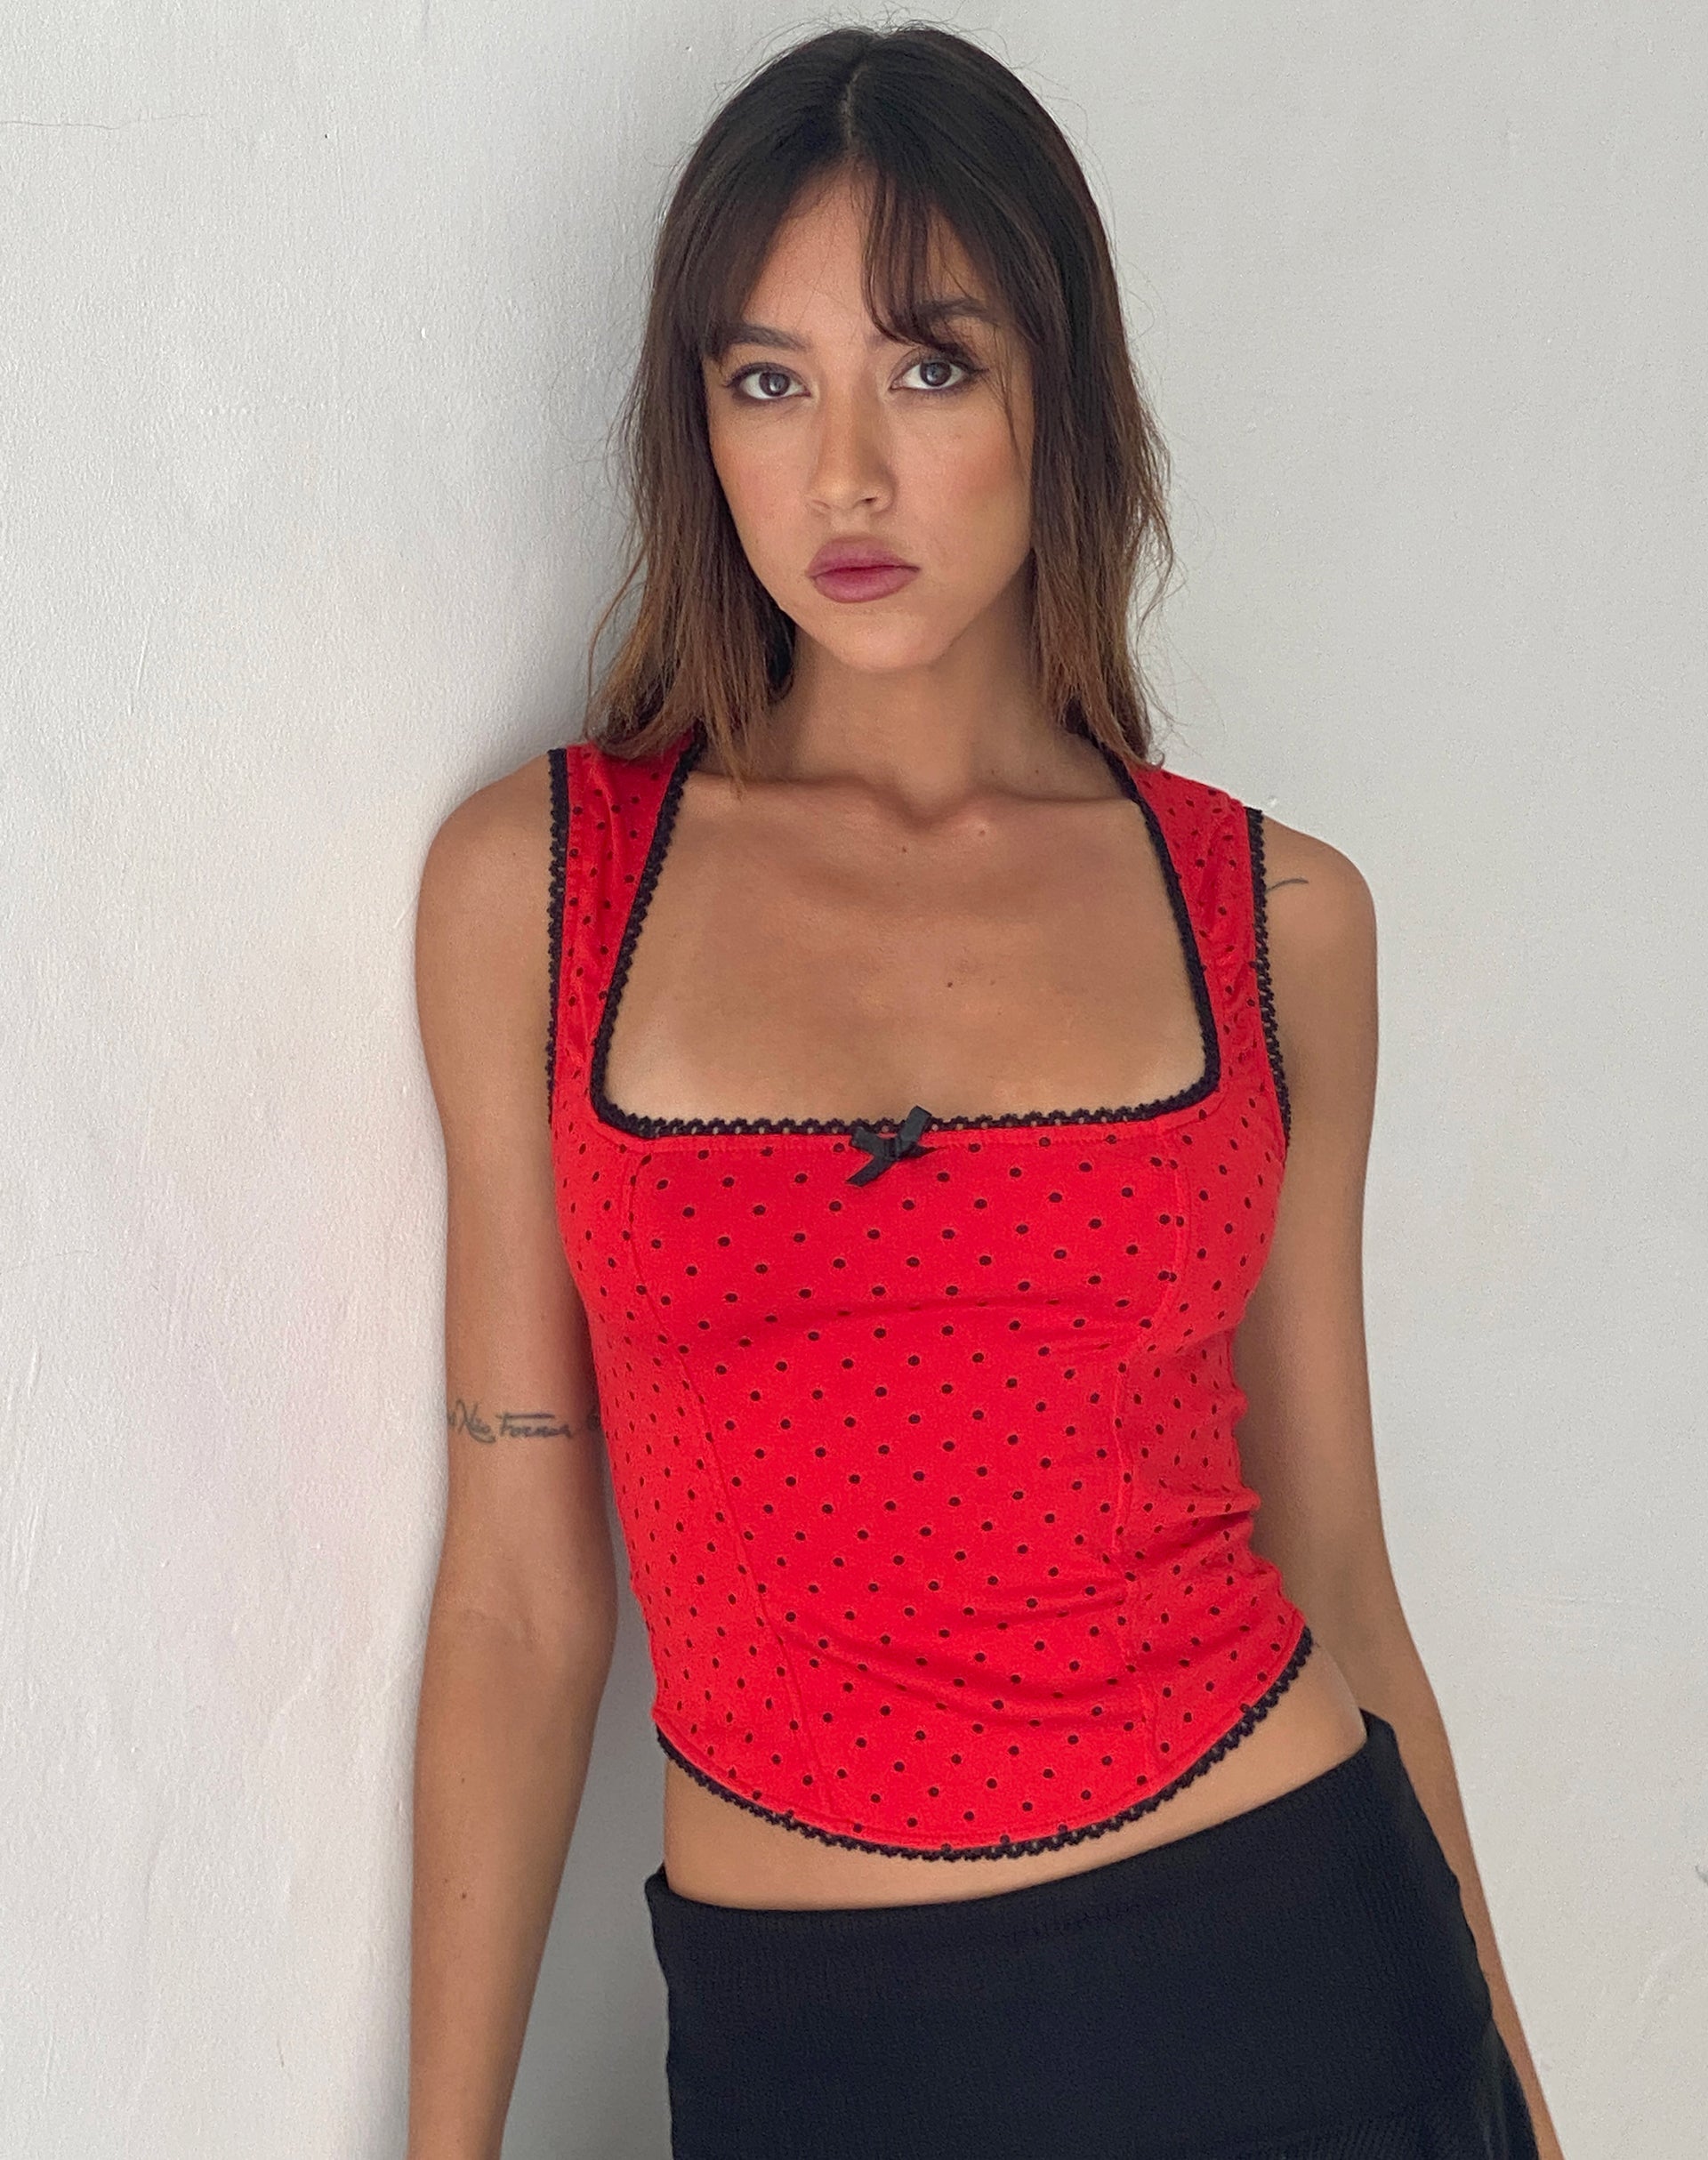 Image of Jinisa Corset Top in Red Polka